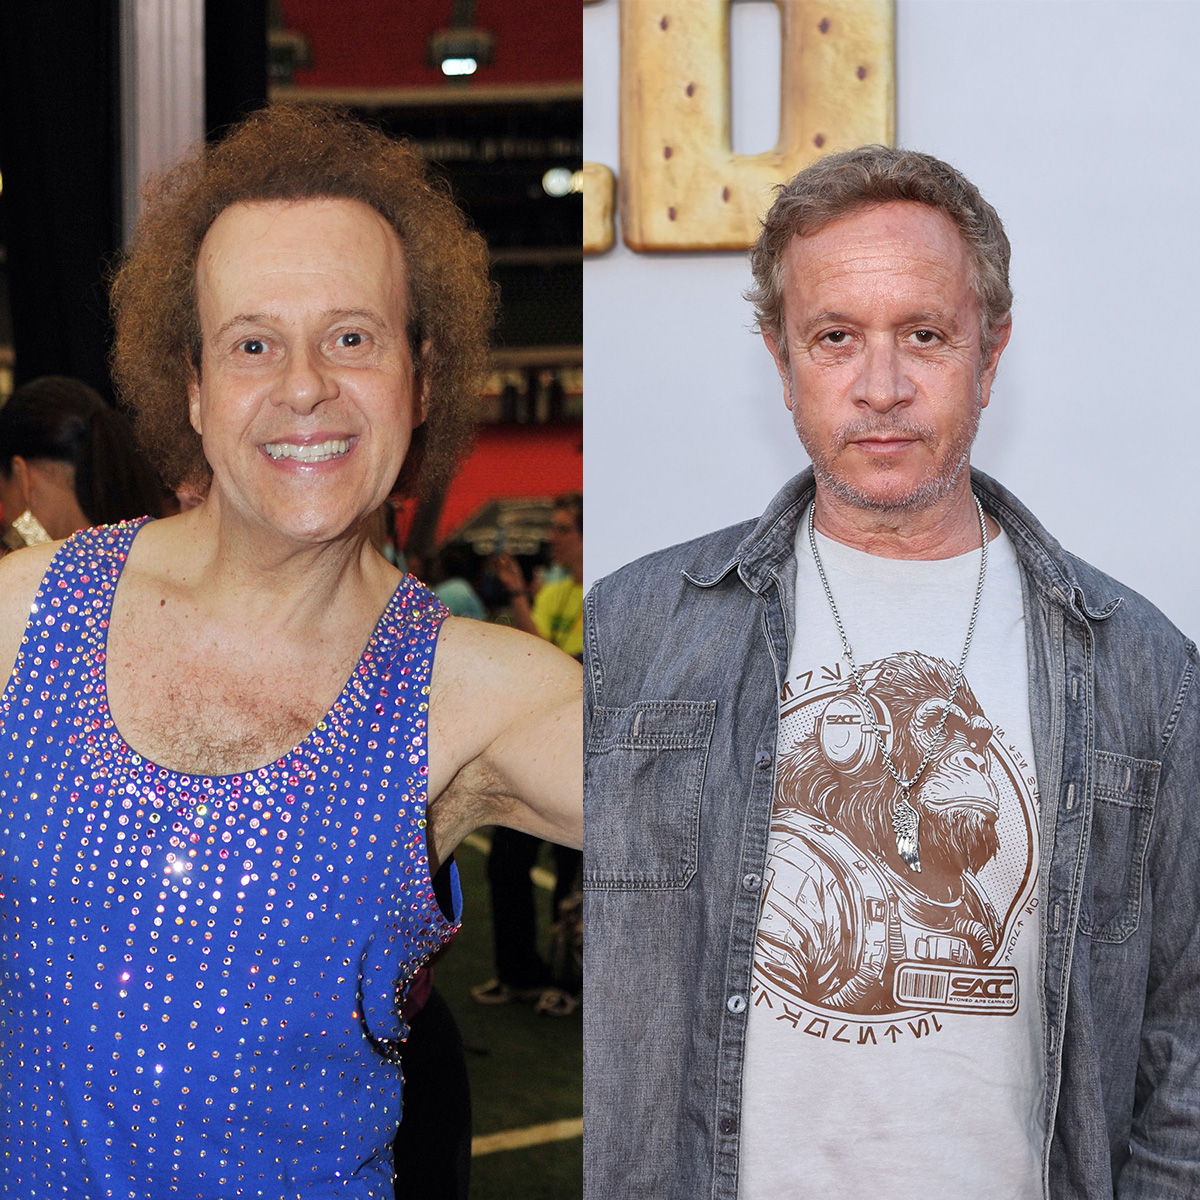 Pauly Shore Honors “One of a Kind” Richard Simmons After His Death